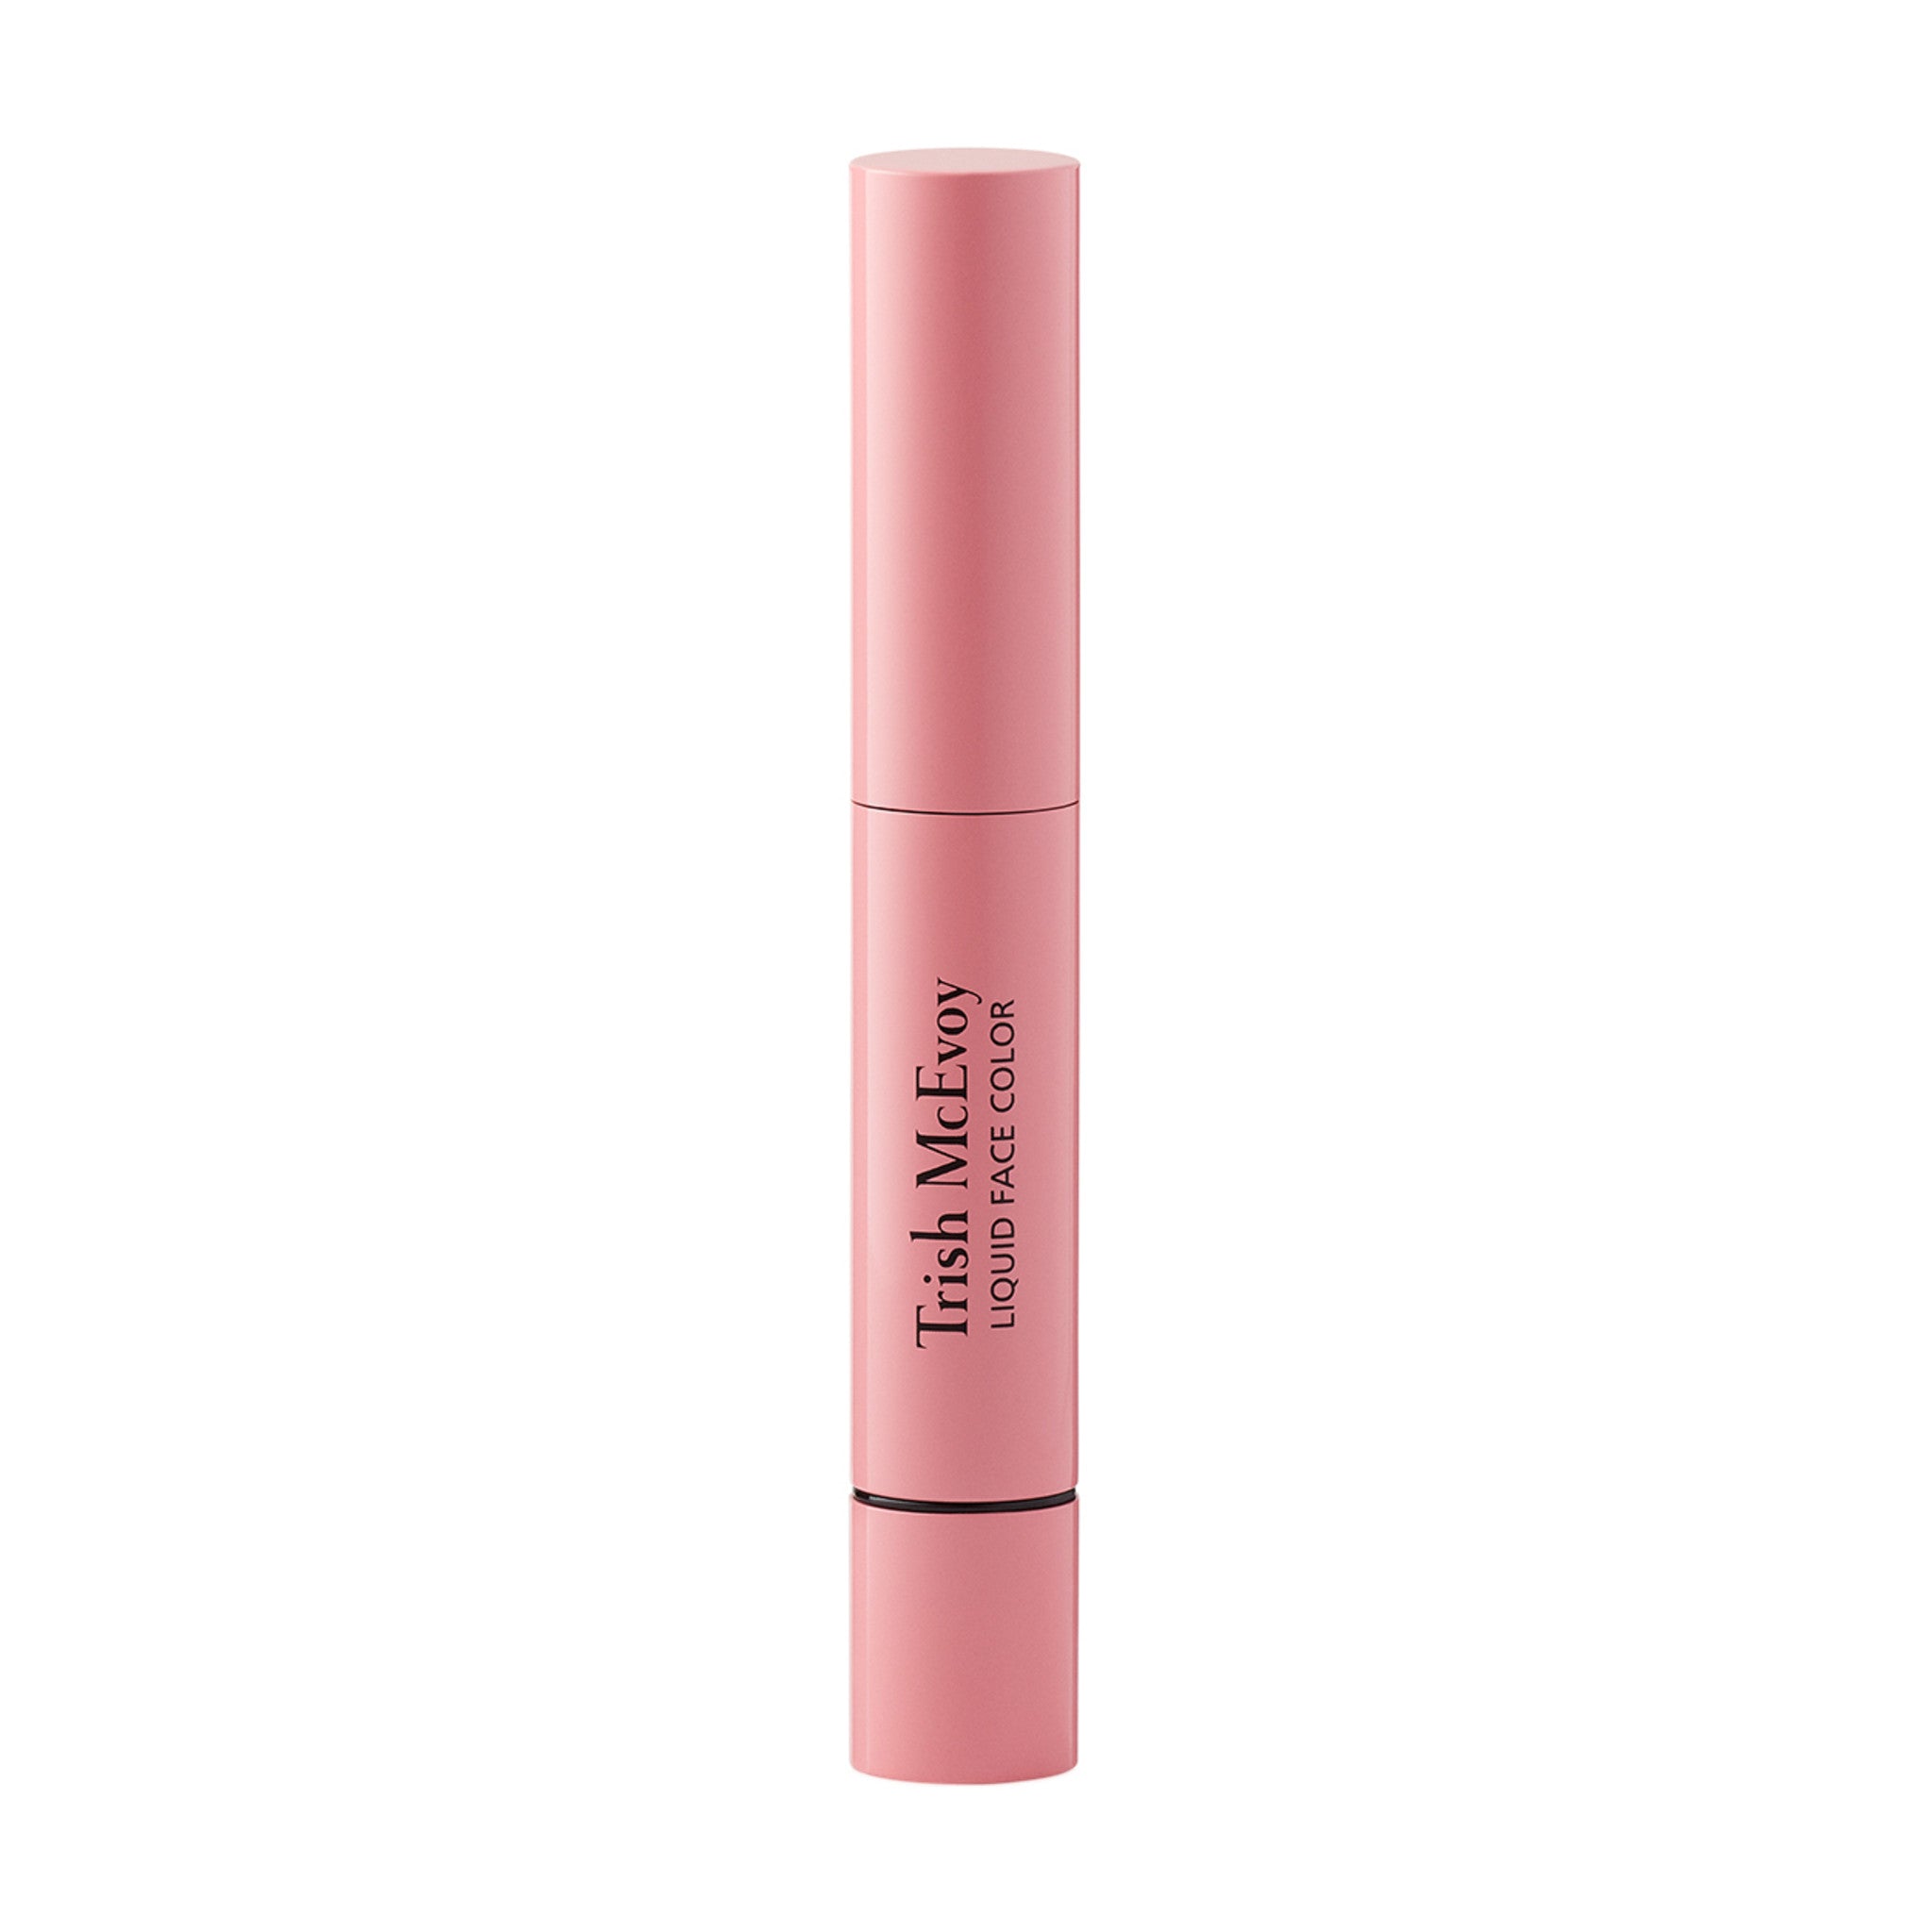 Trish McEvoy Liquid Face Color main image. This product is in the color pink